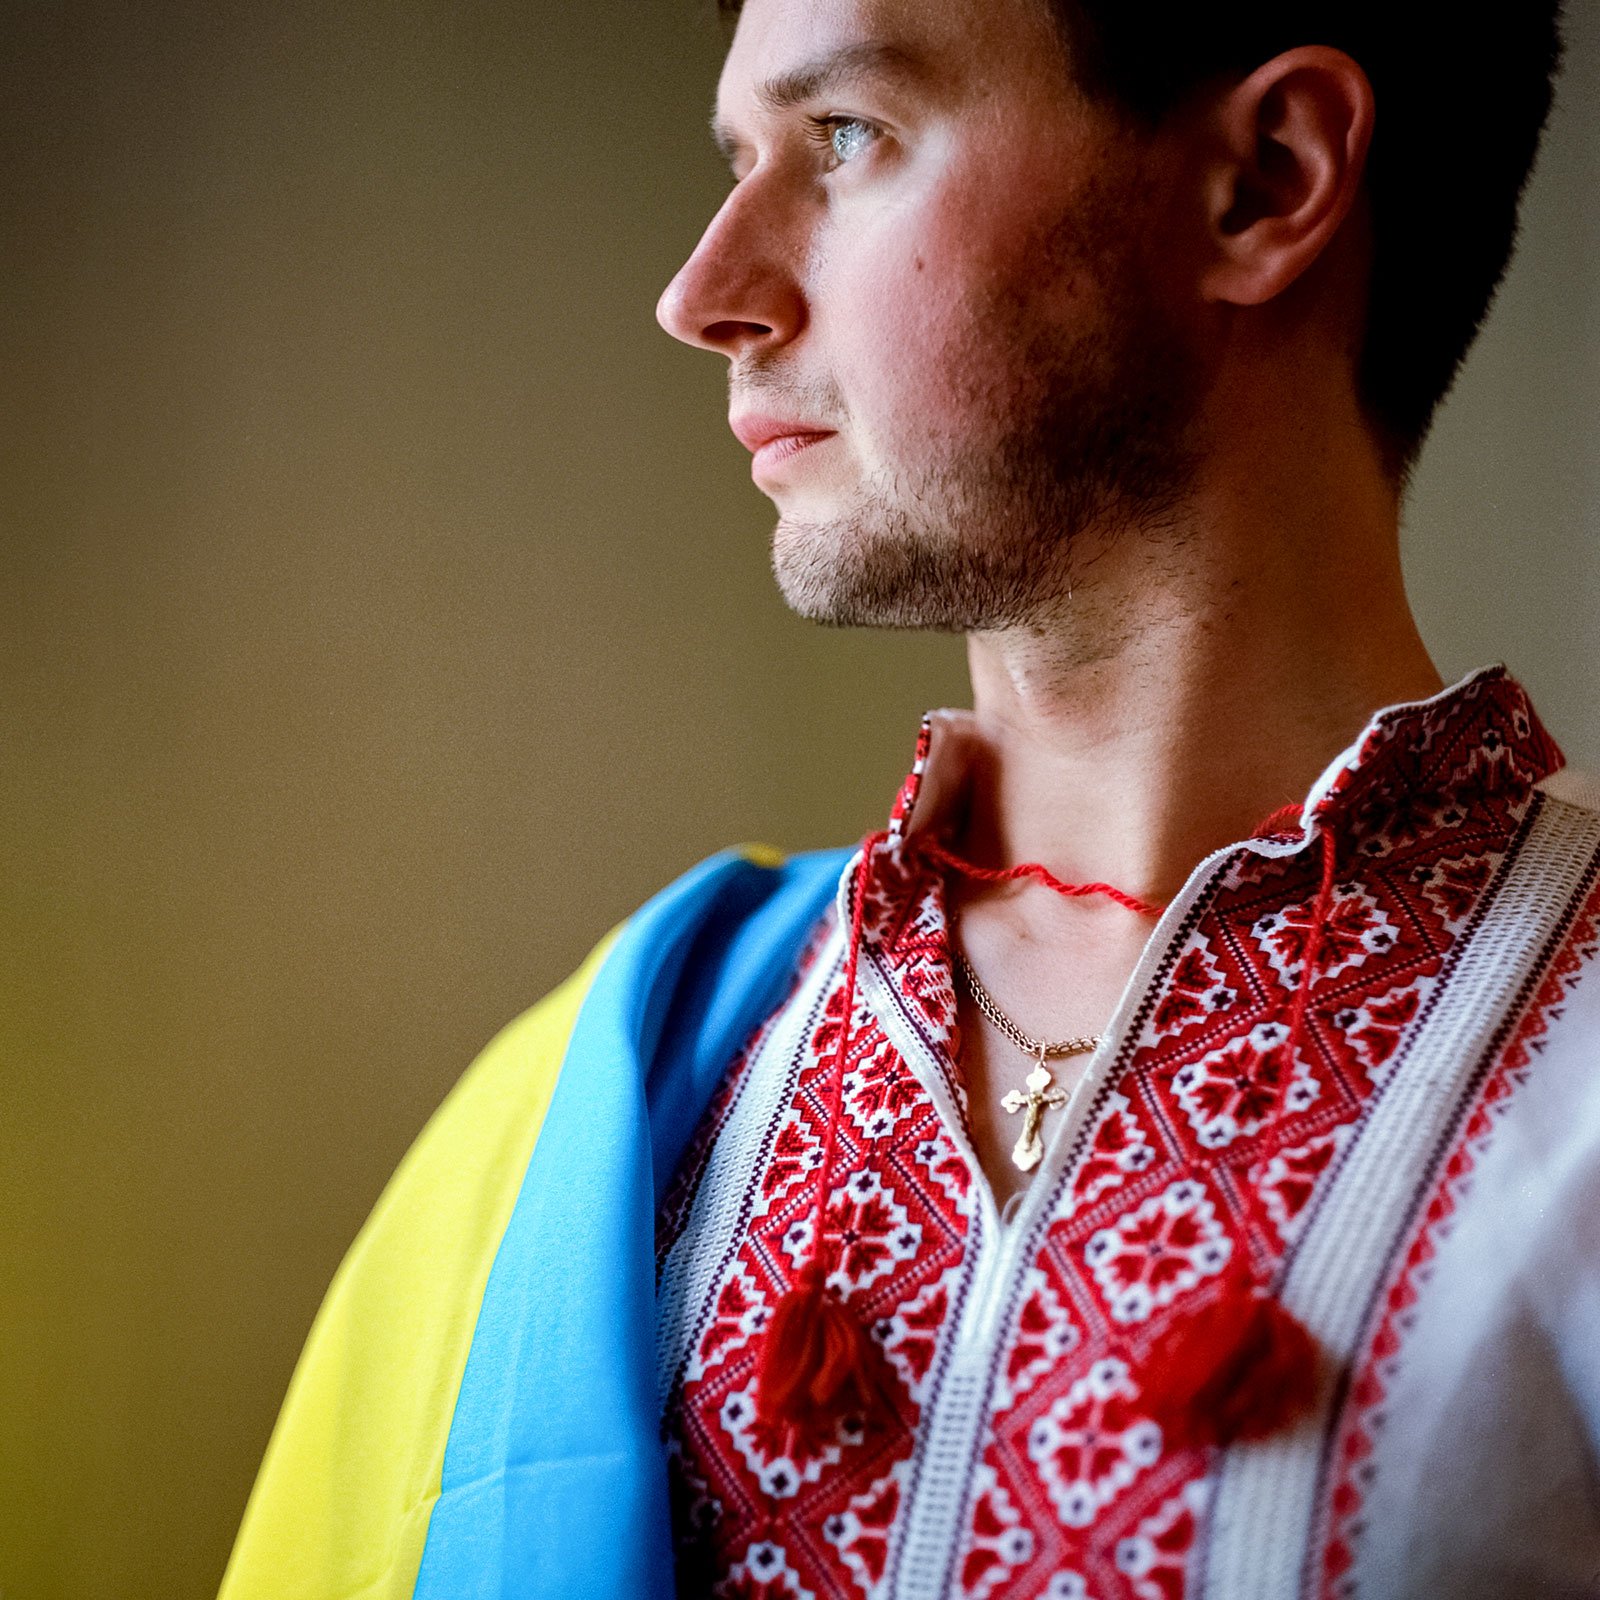 Young Ukrainian man in traditional dress